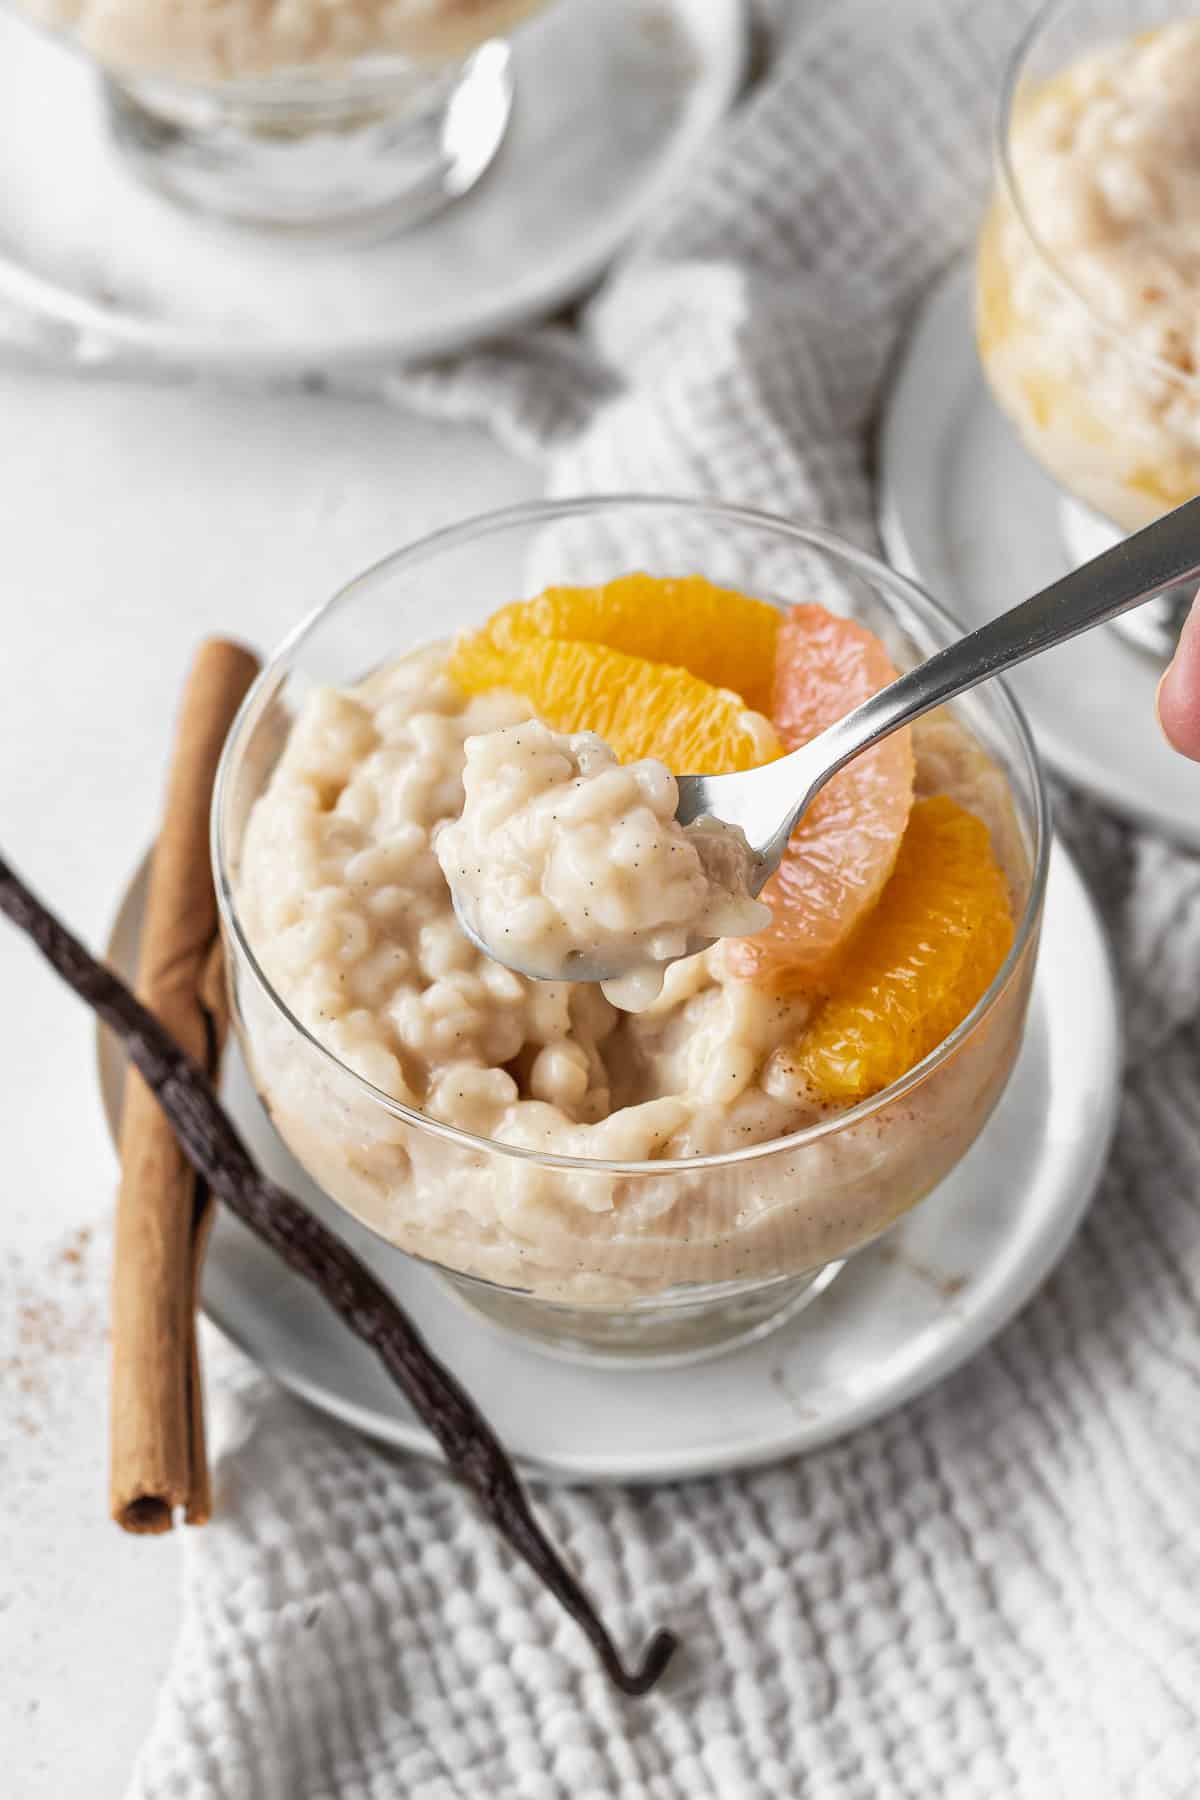 A spoon scooping a bite of vegan rice pudding.